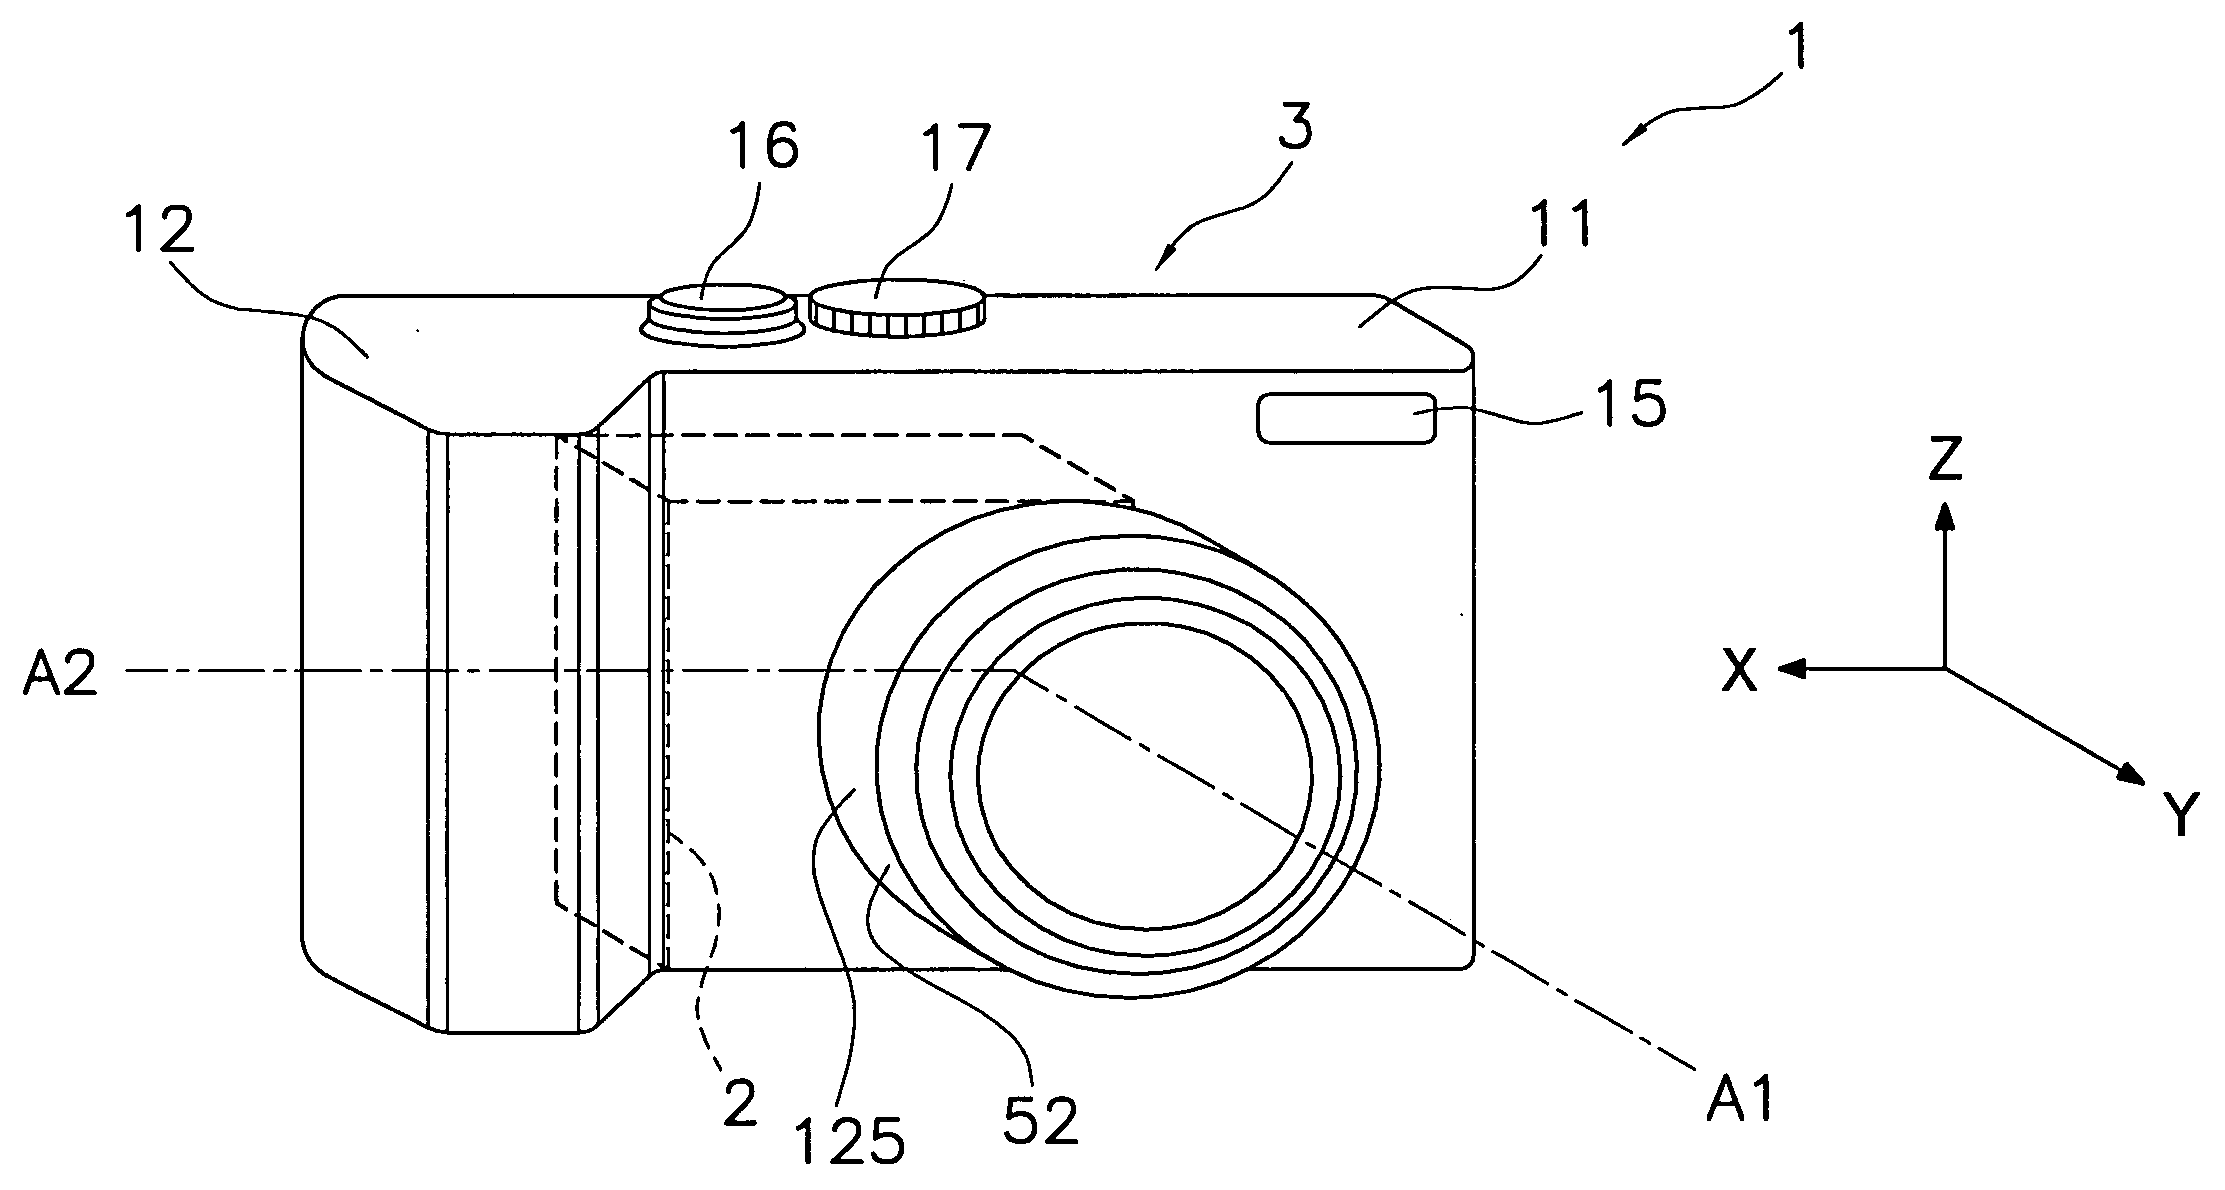 Image blur correction device and camera